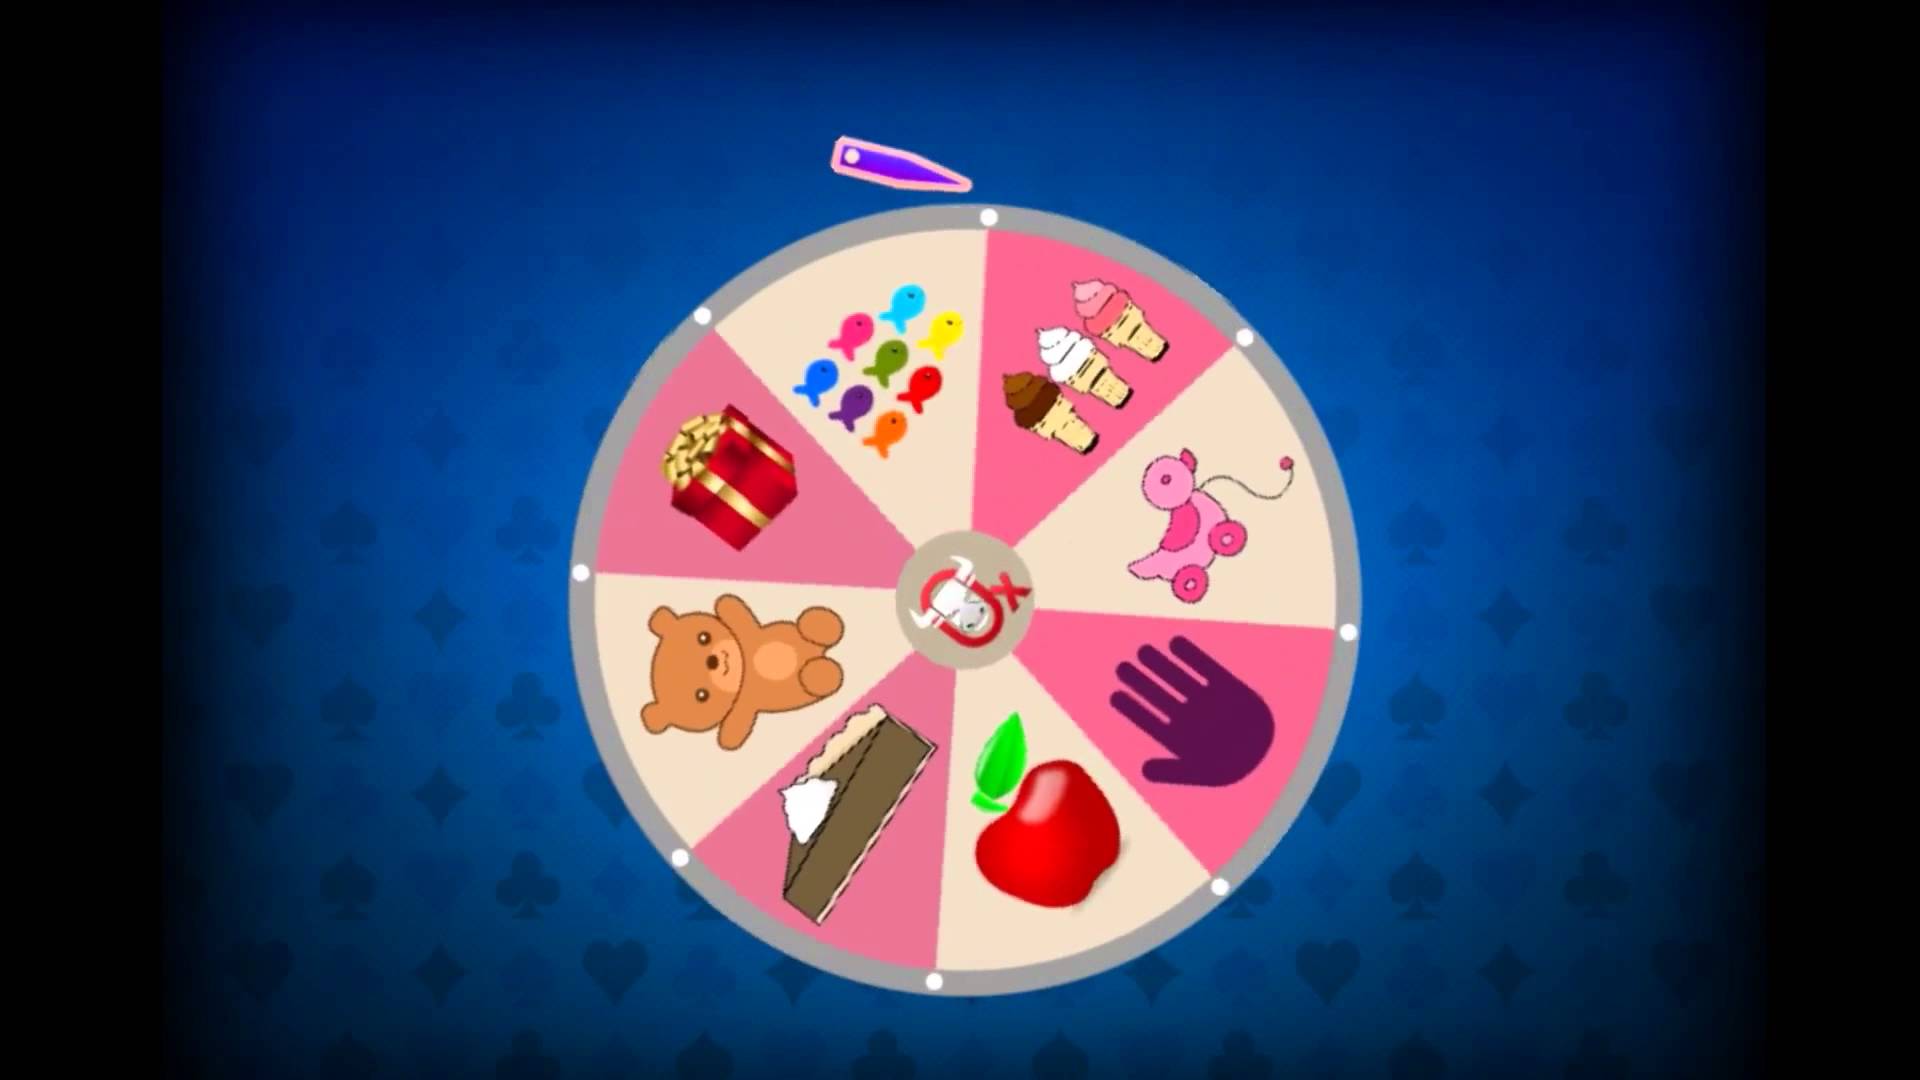 How To Make A Candy Crush Spin Wheel On Unity?